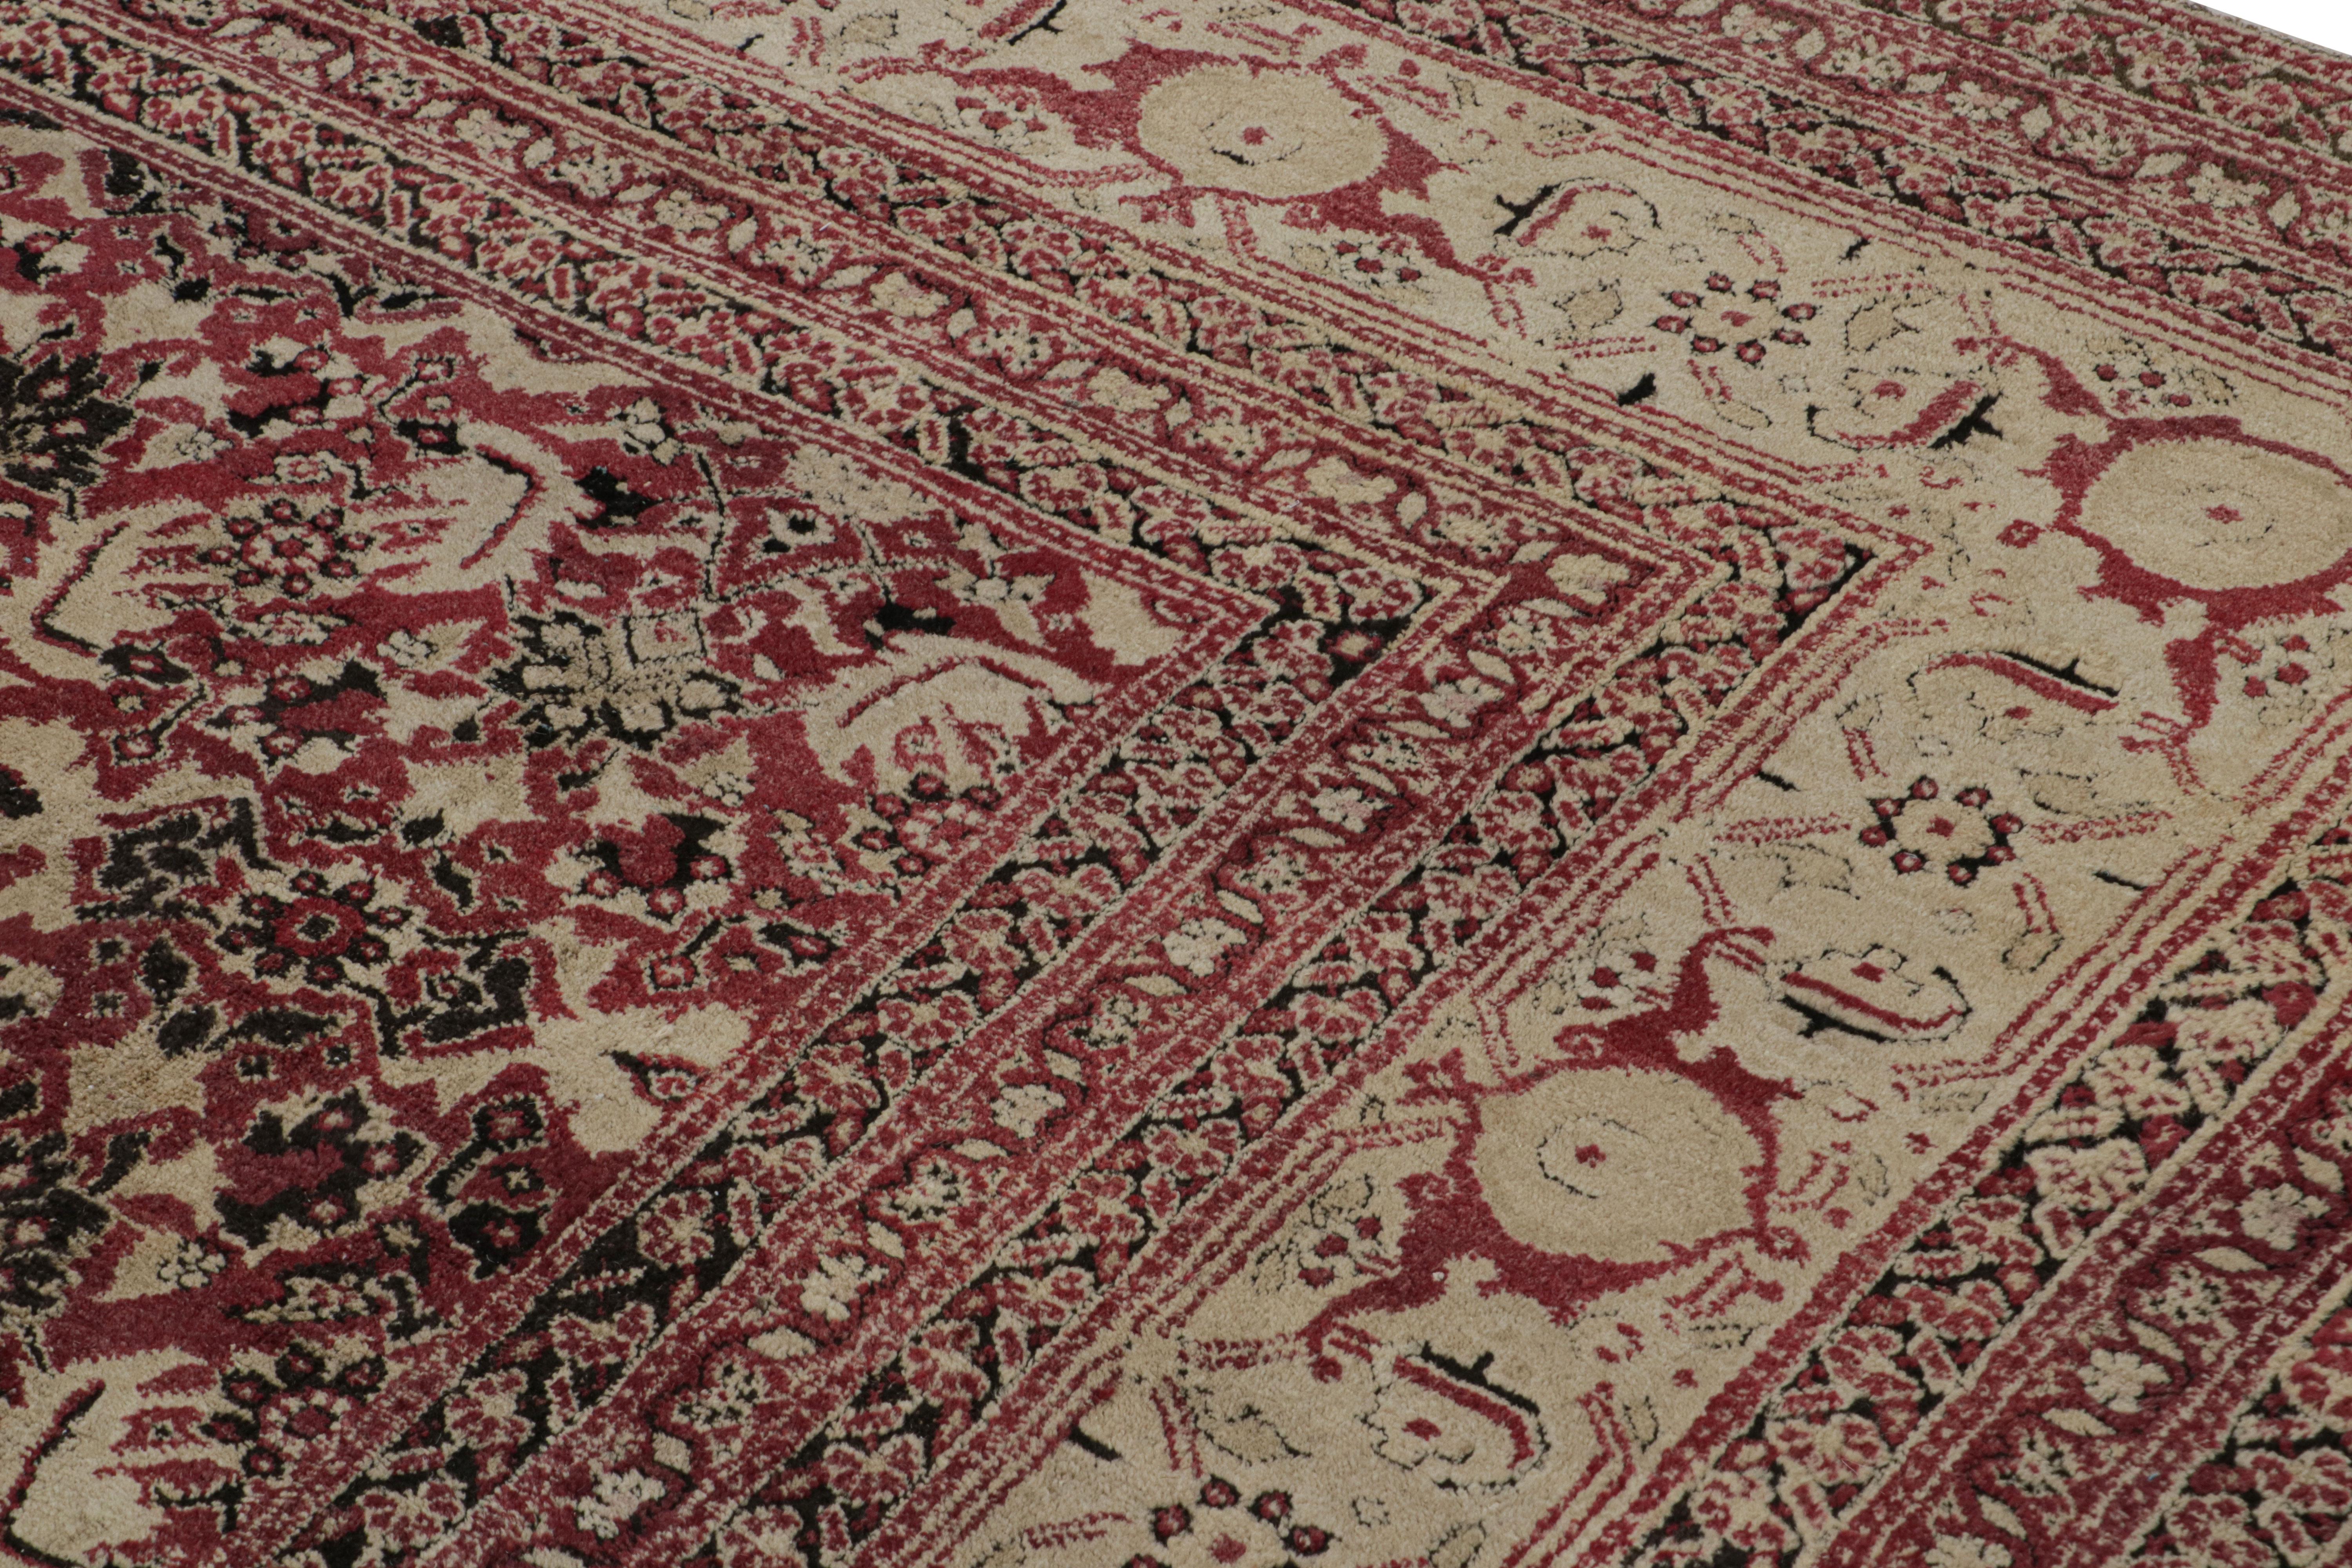 Hand-Knotted Antique Agra Square Rug in Burgundy with Floral Patterns, from Rug & Kilim For Sale